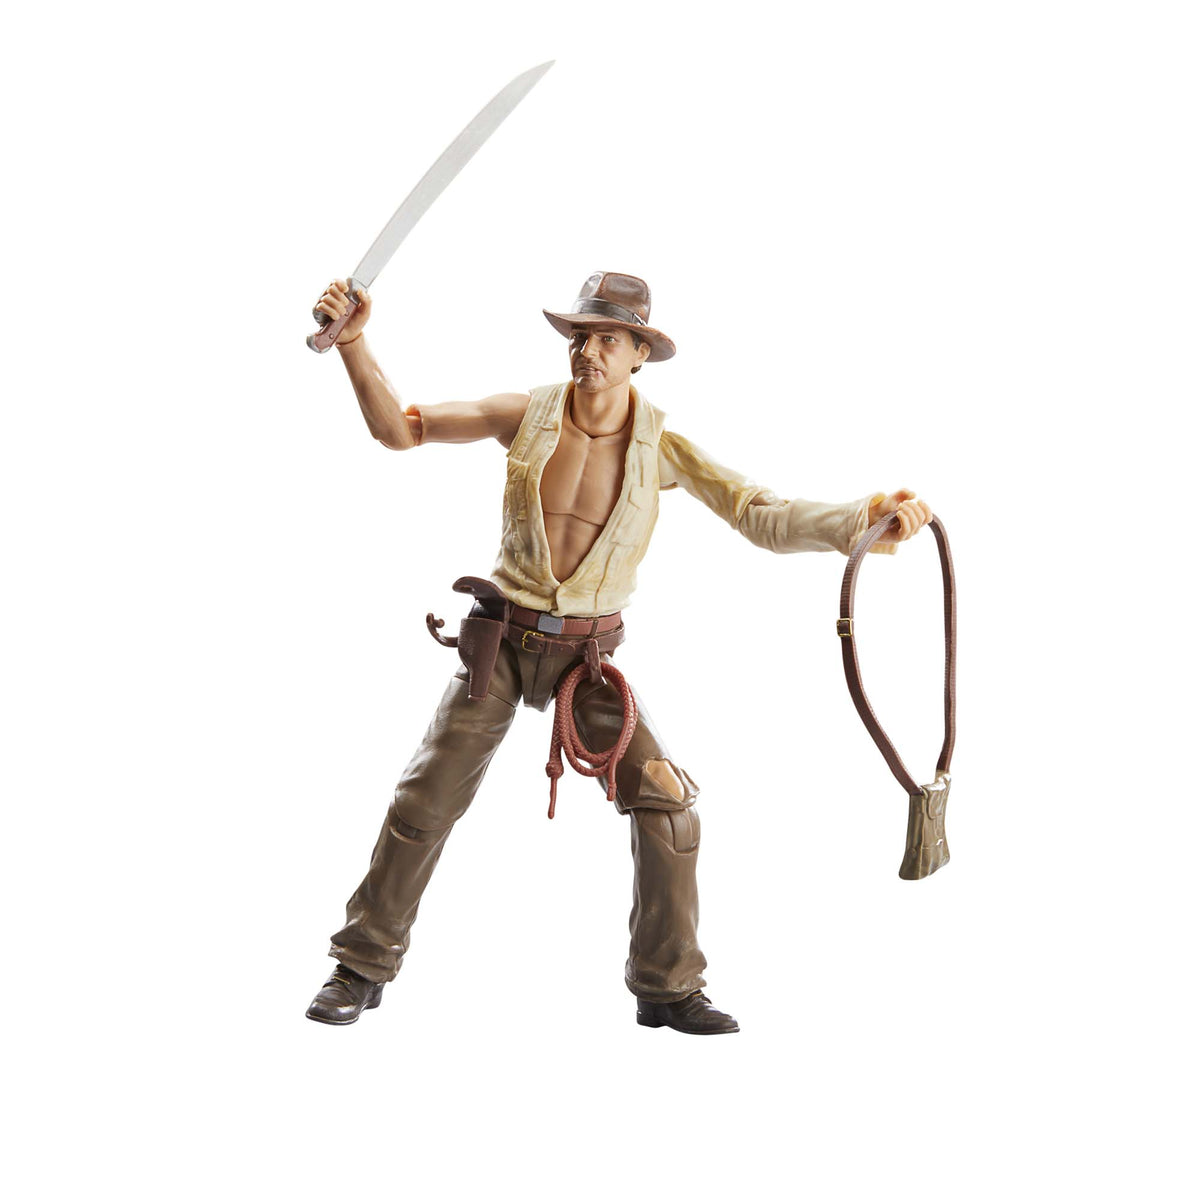 Indiana Jones and the Temple of Doom Figures Revealed at Star Wars  Celebration - IGN